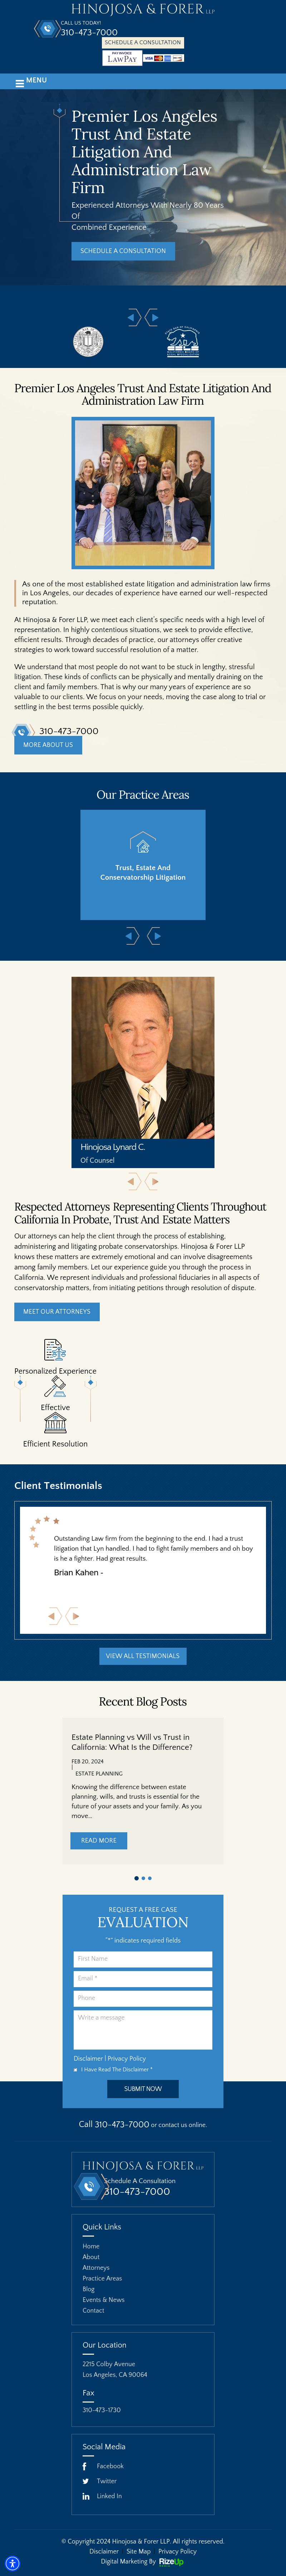 Hinojosa & Forer LLP - Los Angeles CA Lawyers